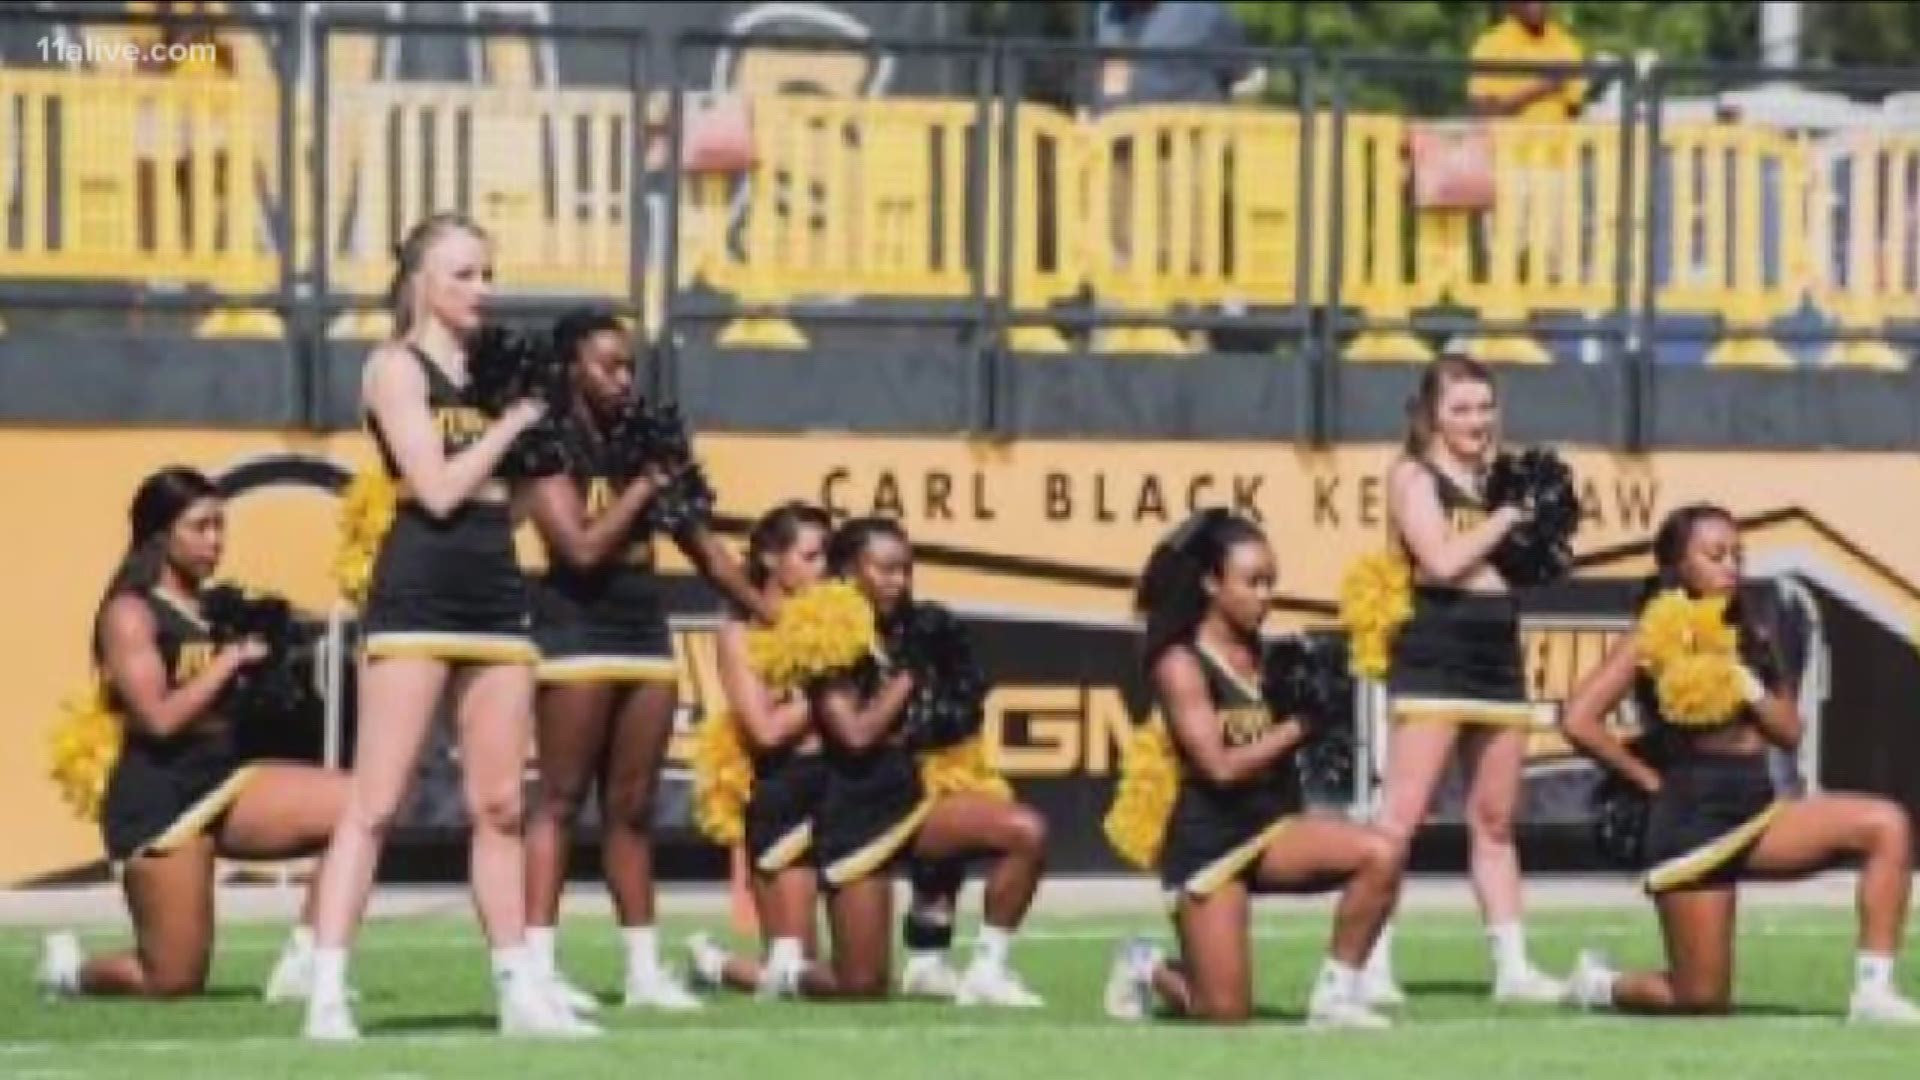 The five cheerleaders stirred controversy last year when they knelt before the start of one of KSU's home football games on Sept. 30. 